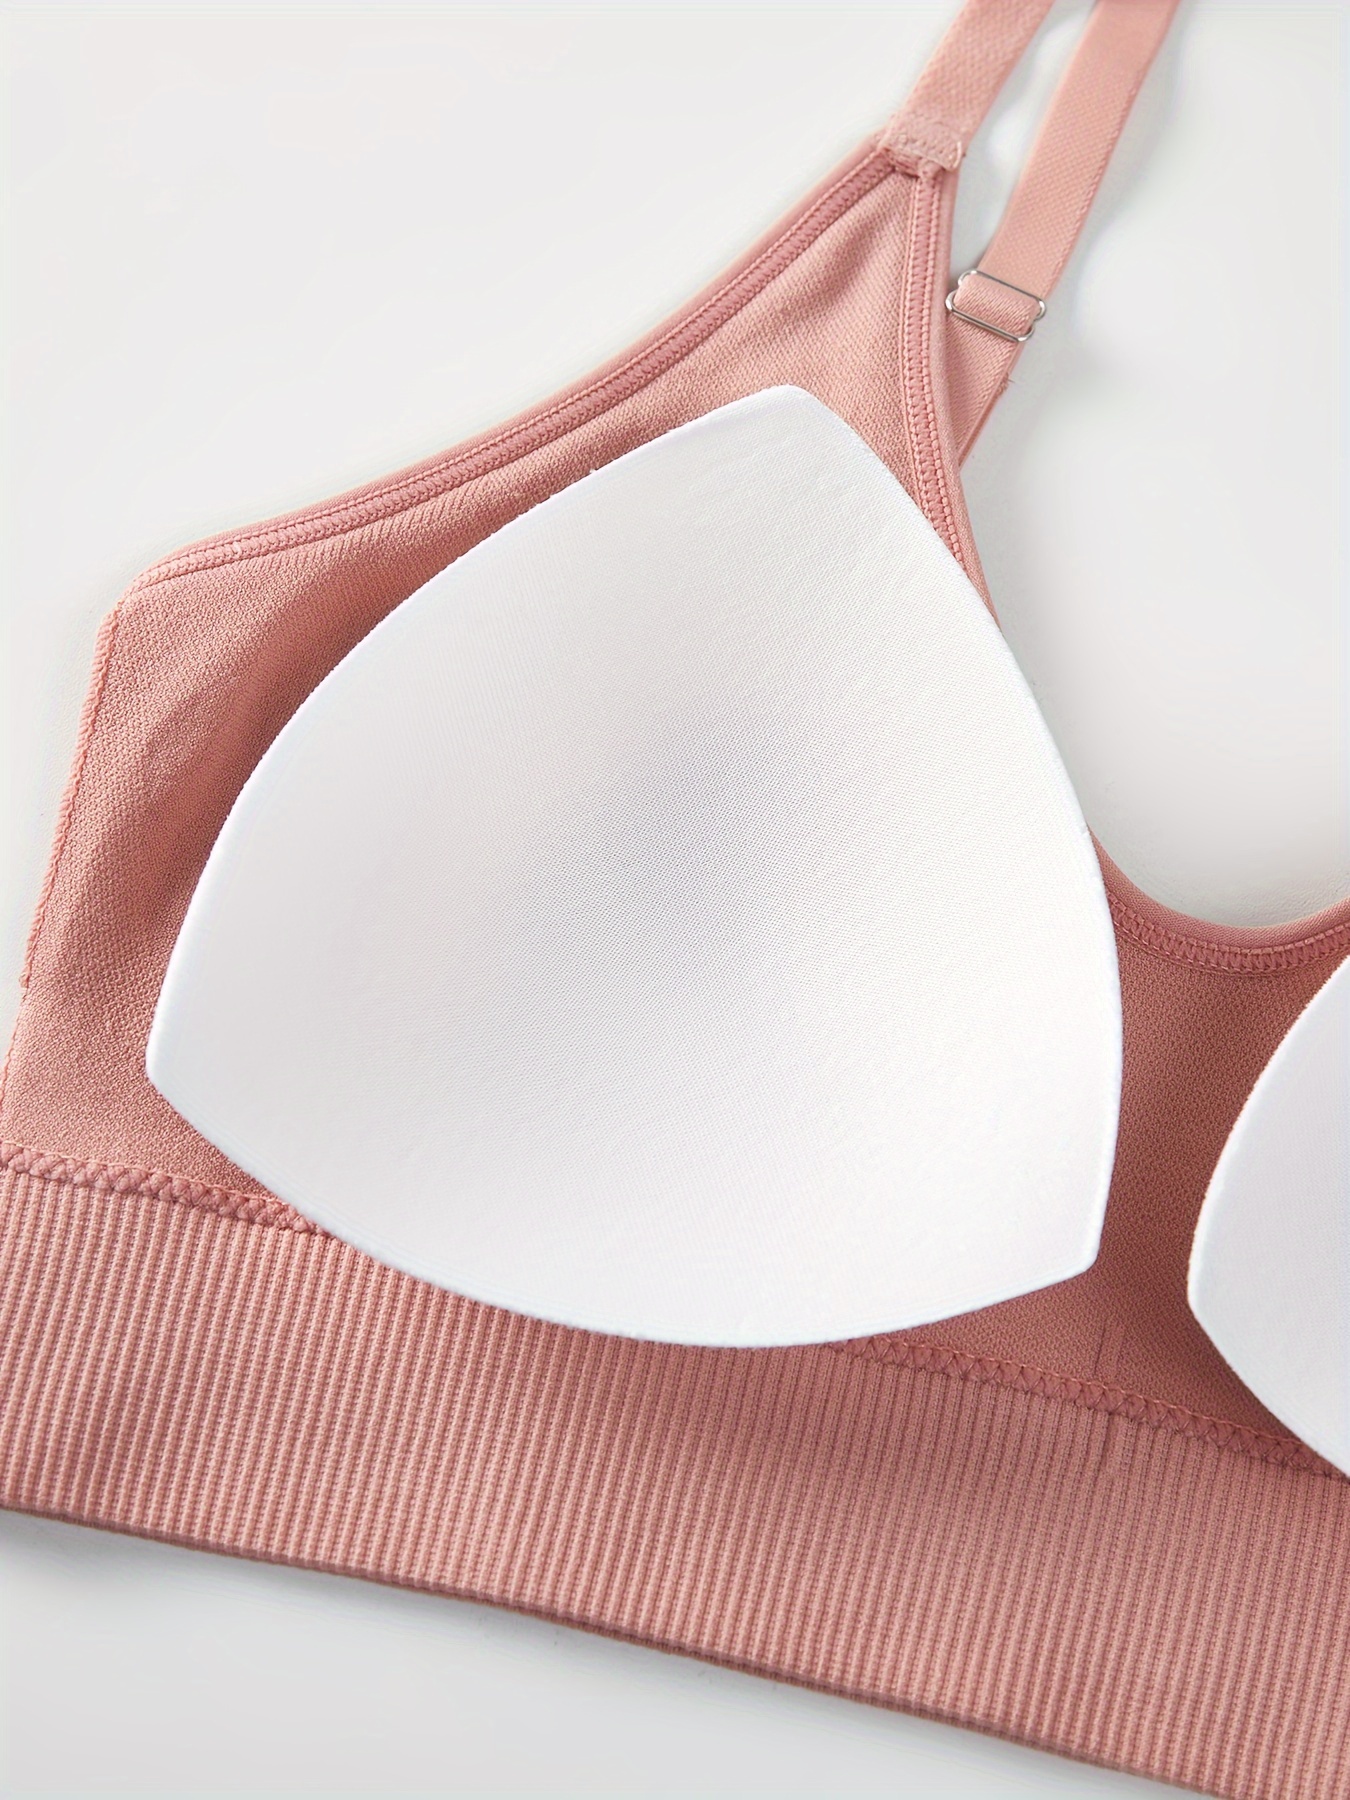 Breathable Lace Wireless Camisole Bra Sport Bra For Women Perfect For  Running, Gym, And Fitness Padded, Solid Color, Sexy Cotton Material Beauty  Vest Included From Lizhirou, $18.65